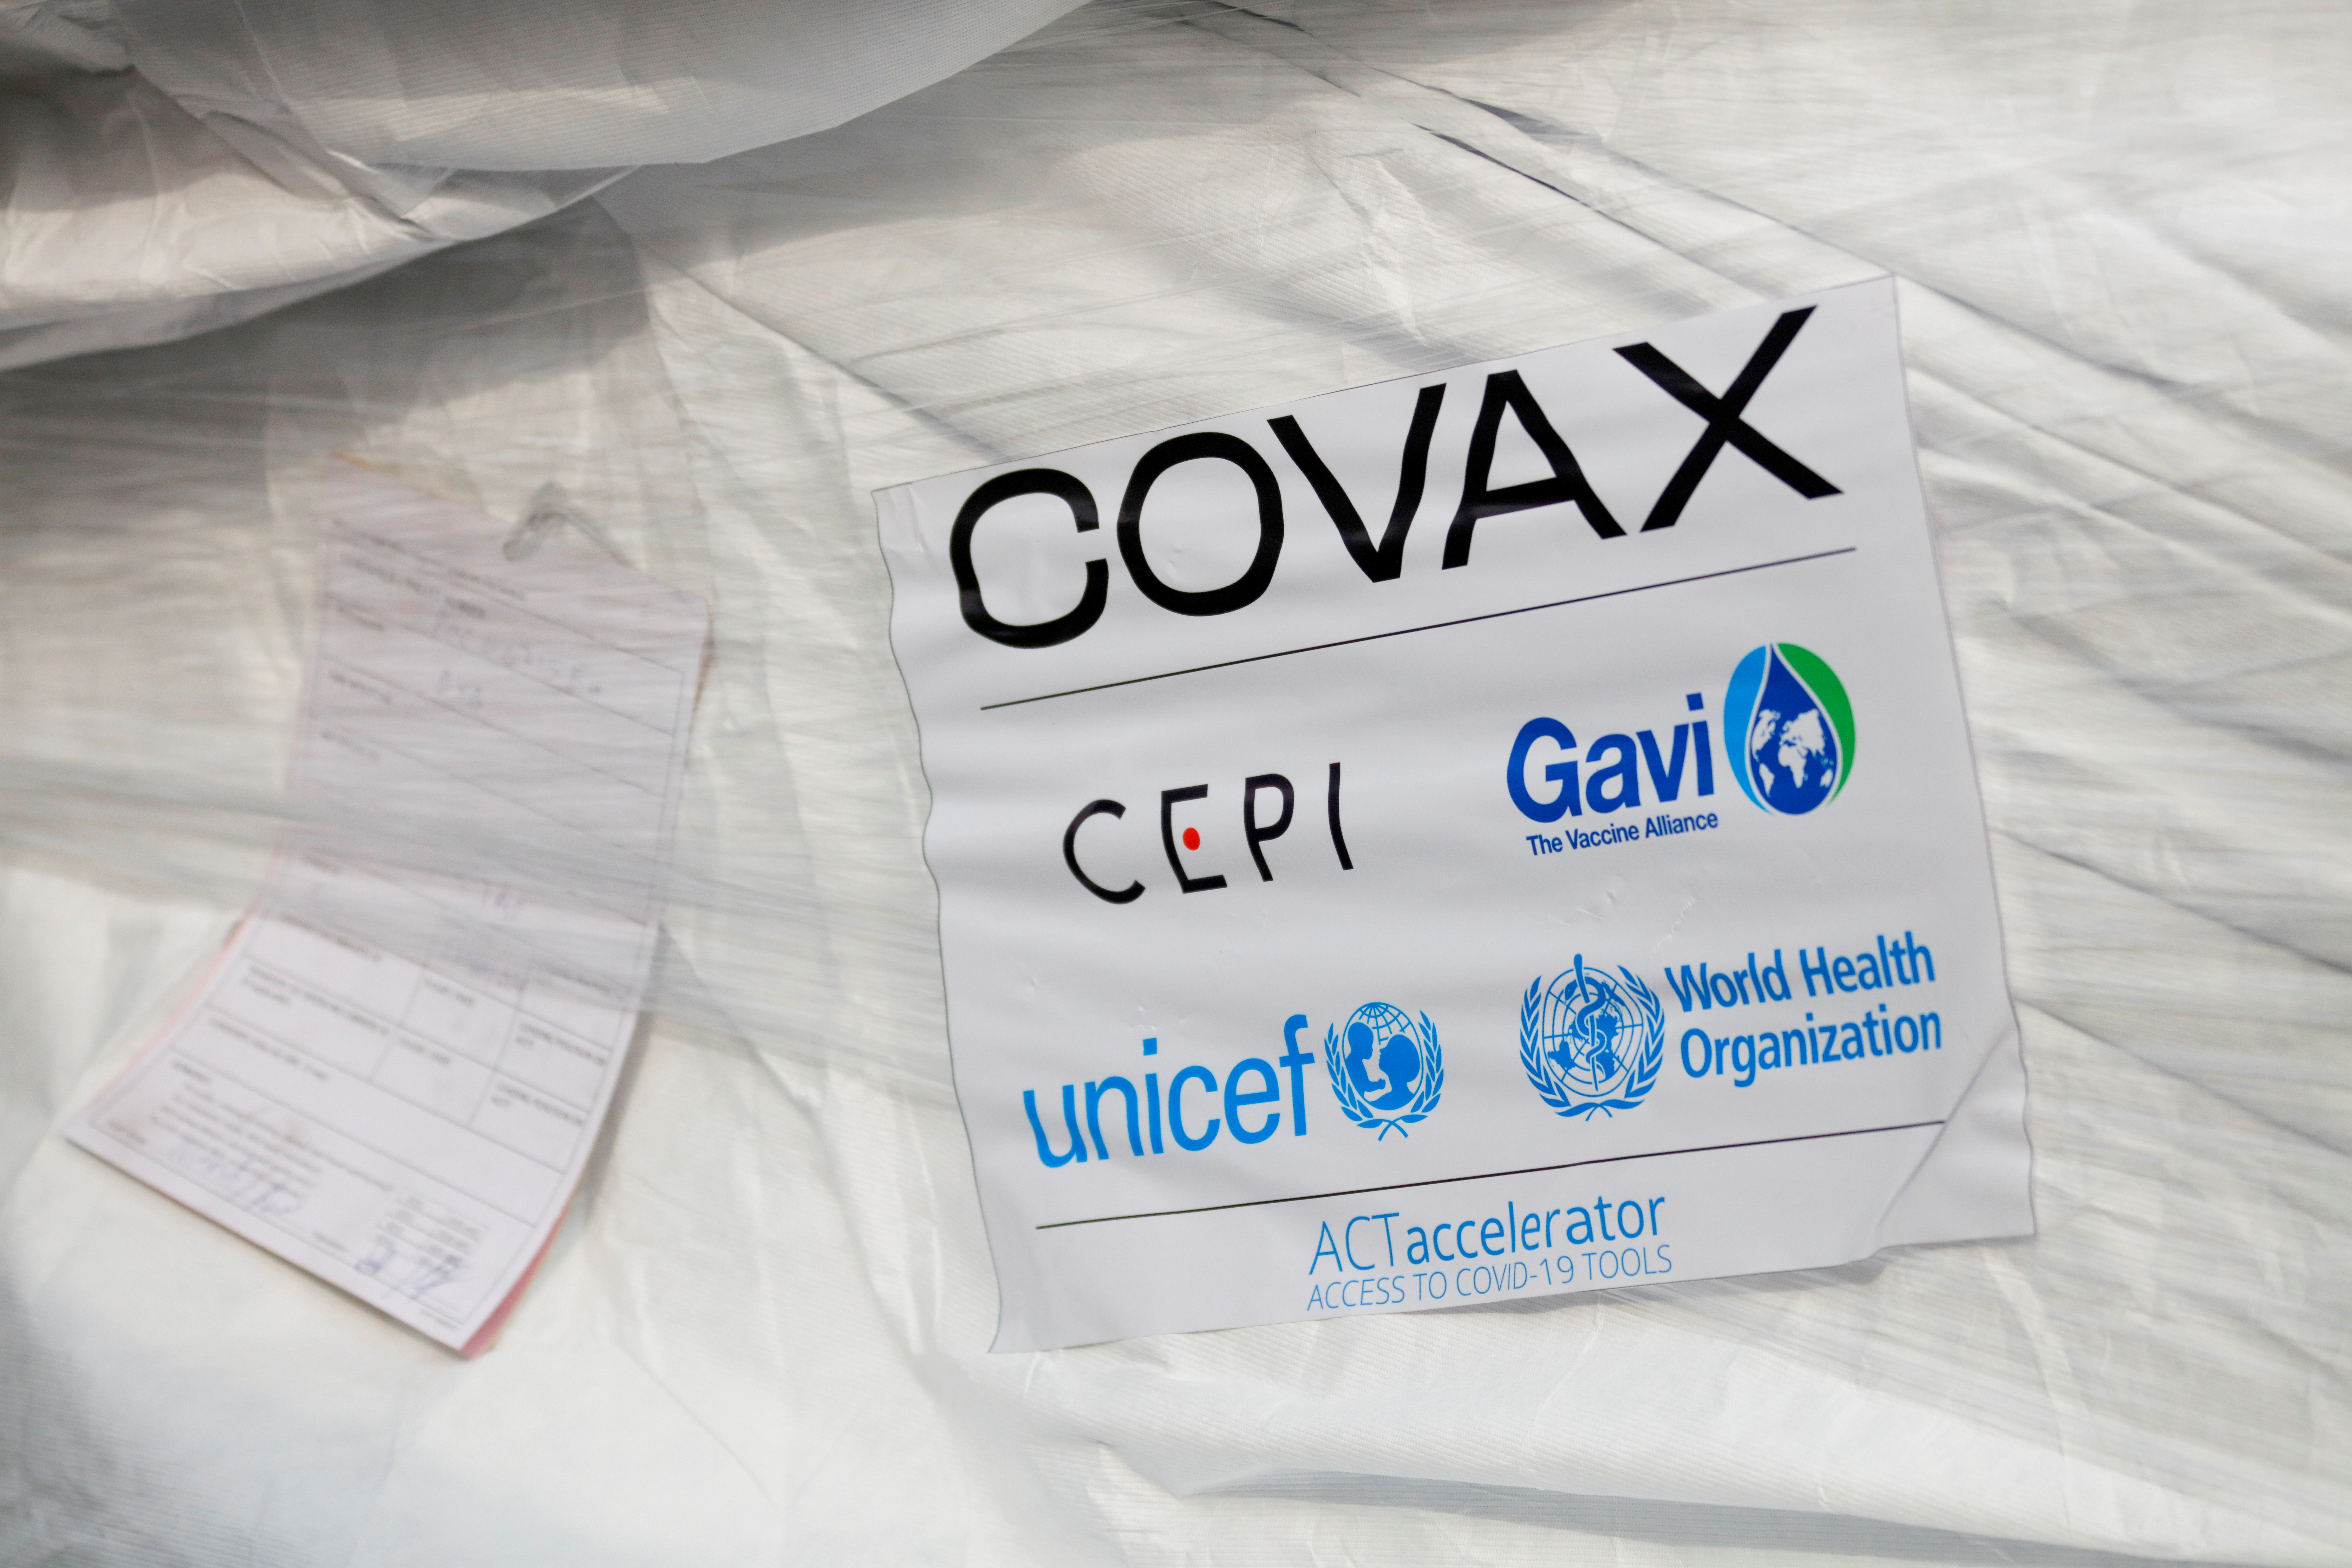 A pack of AstraZeneca/Oxford vaccines is seen as the country receives its first batch of coronavirus disease (COVID-19) vaccines under COVAX scheme, in Accra